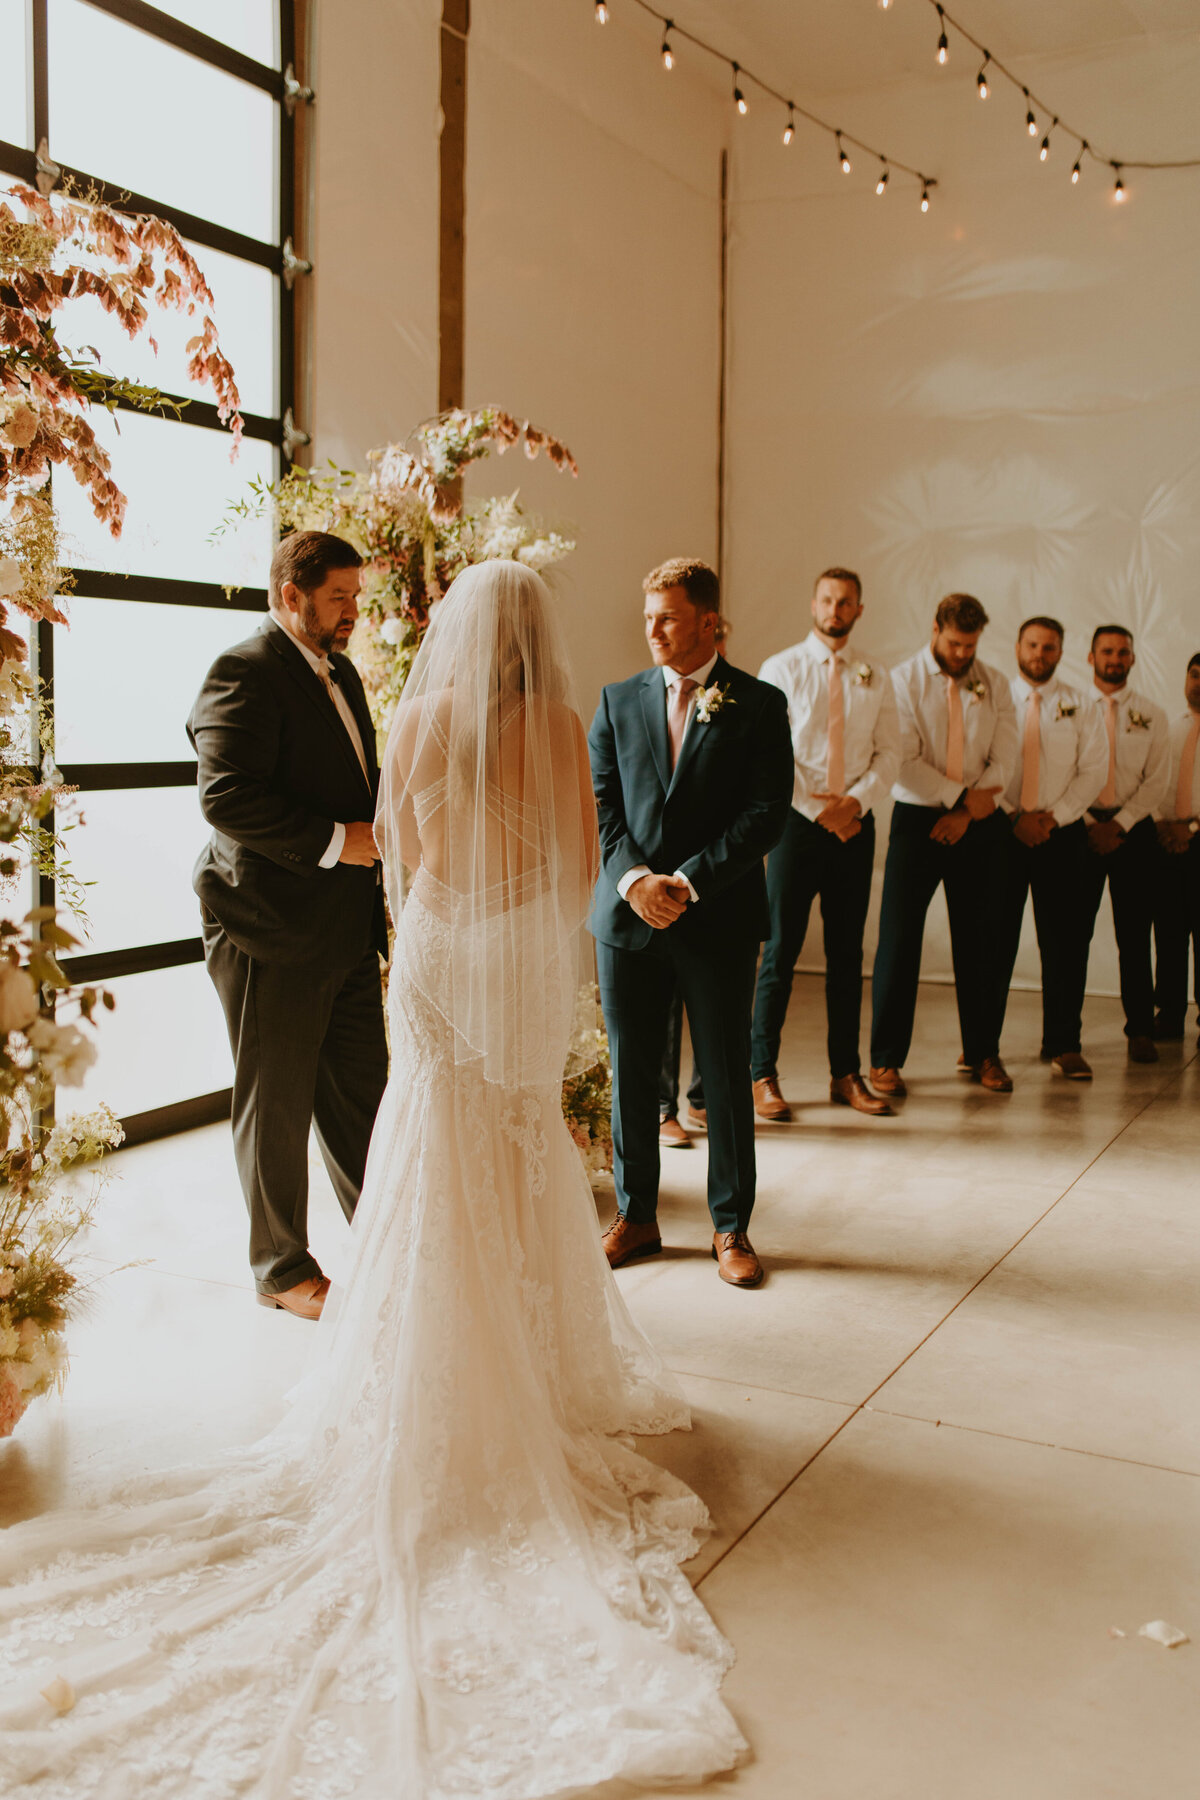 The couple with groomsmen behind, standing at the altar.